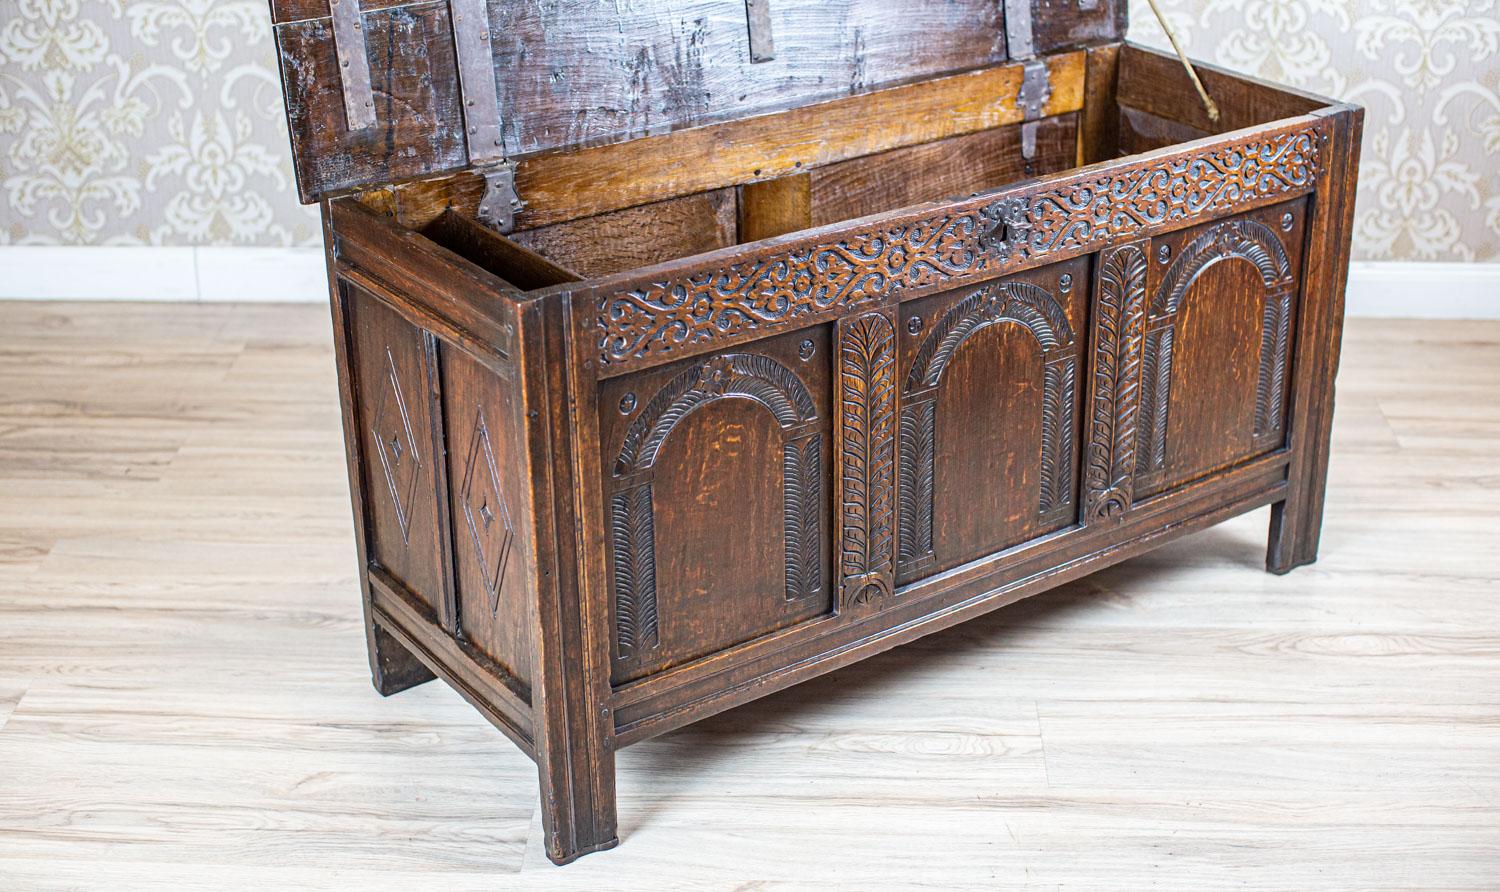 19th Century 19th-Century Oak Cassone in Carved Floral Patterns For Sale